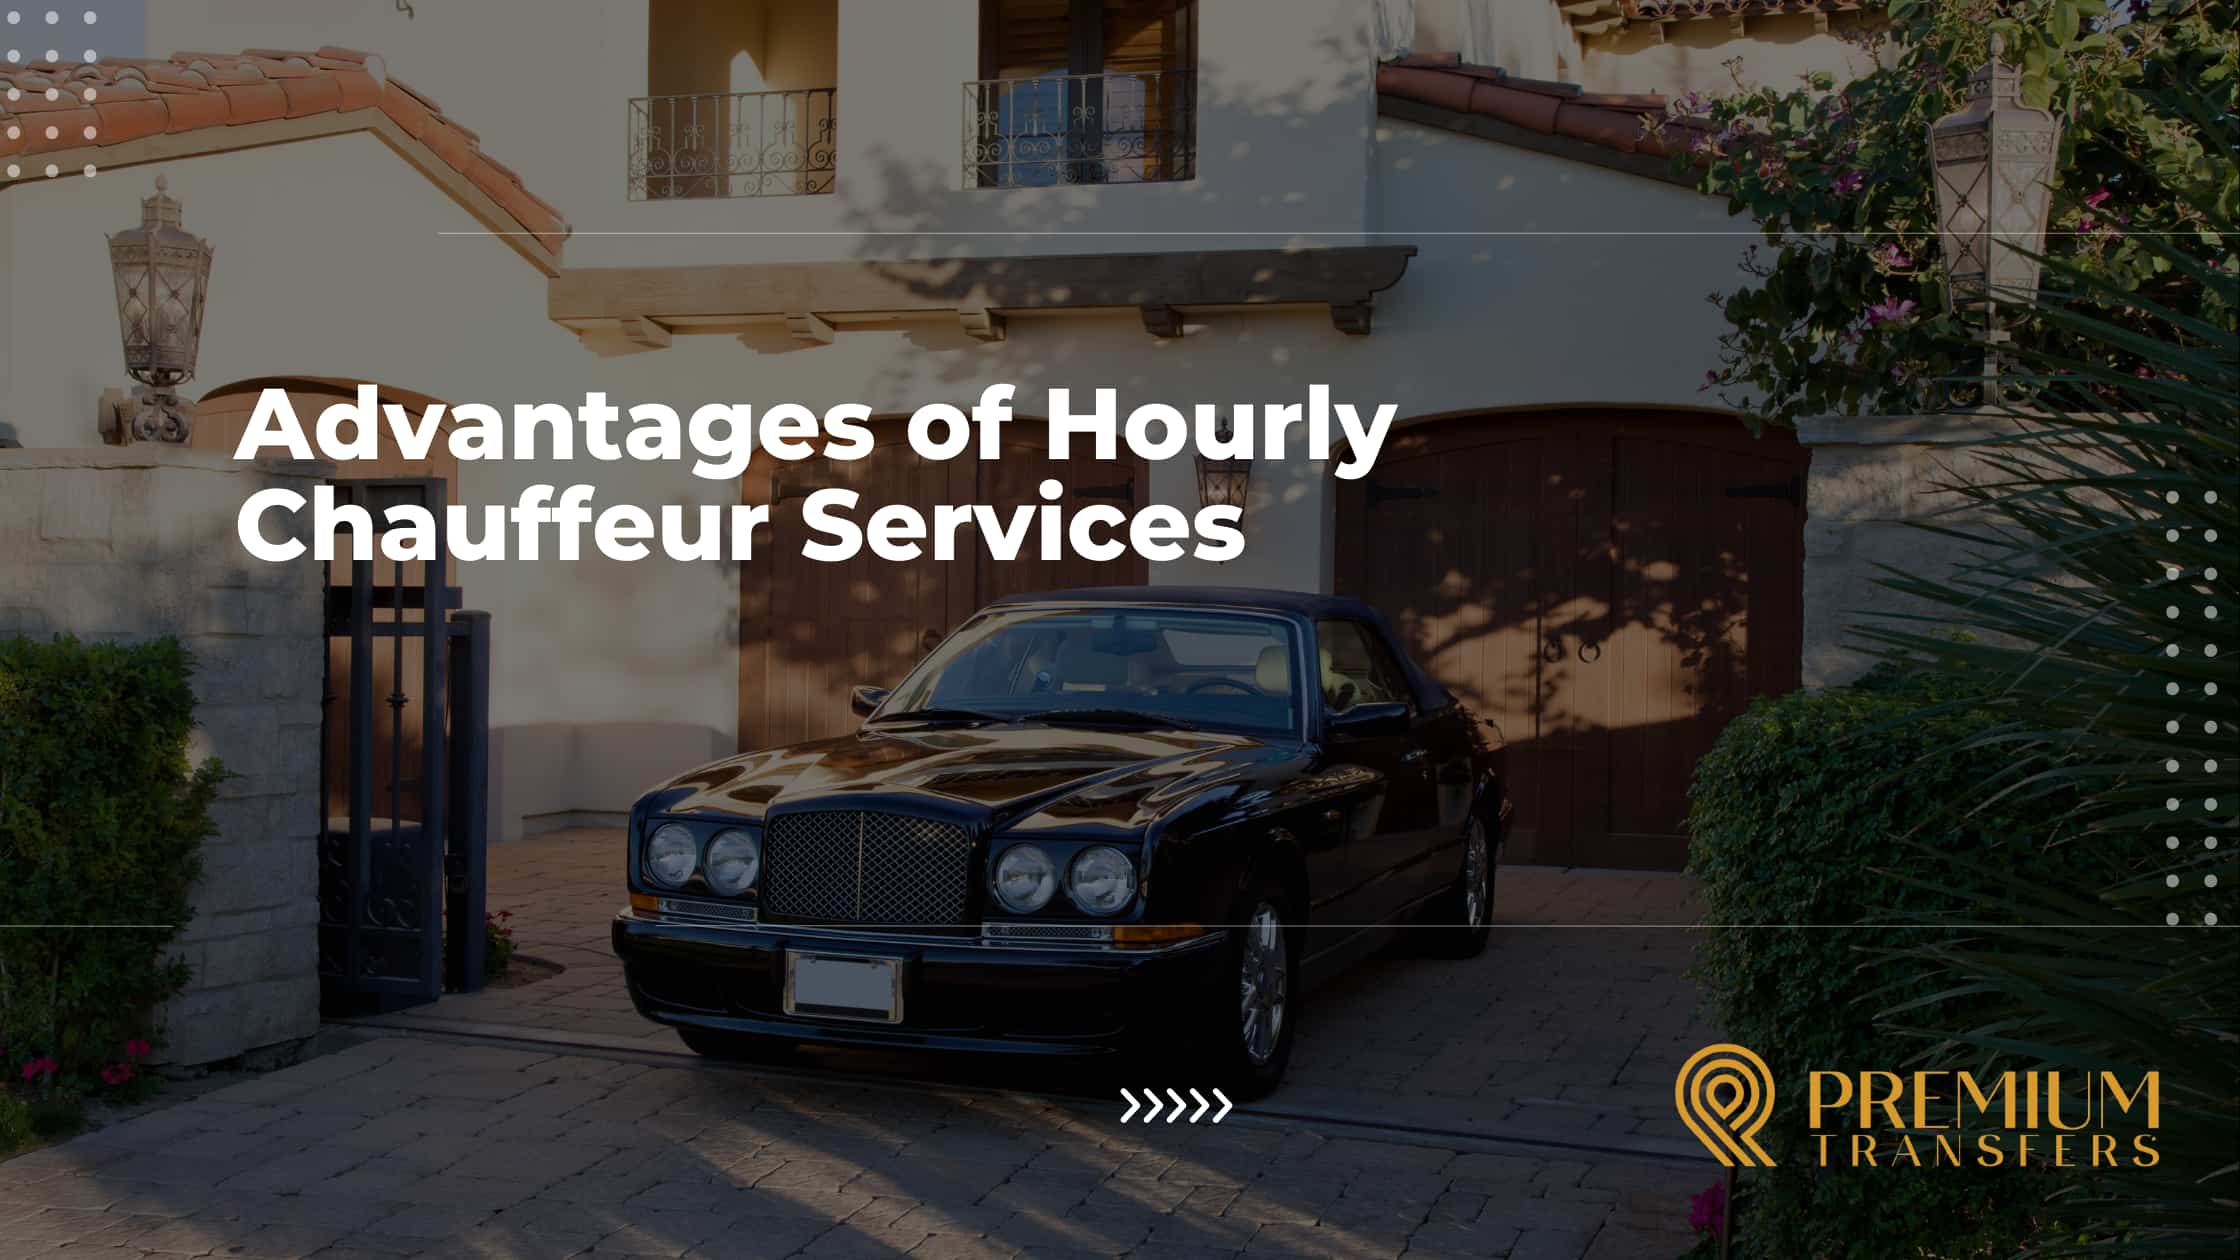 A Glamorous Tour of London: Examining the Advantages of Hourly Chauffeur Services